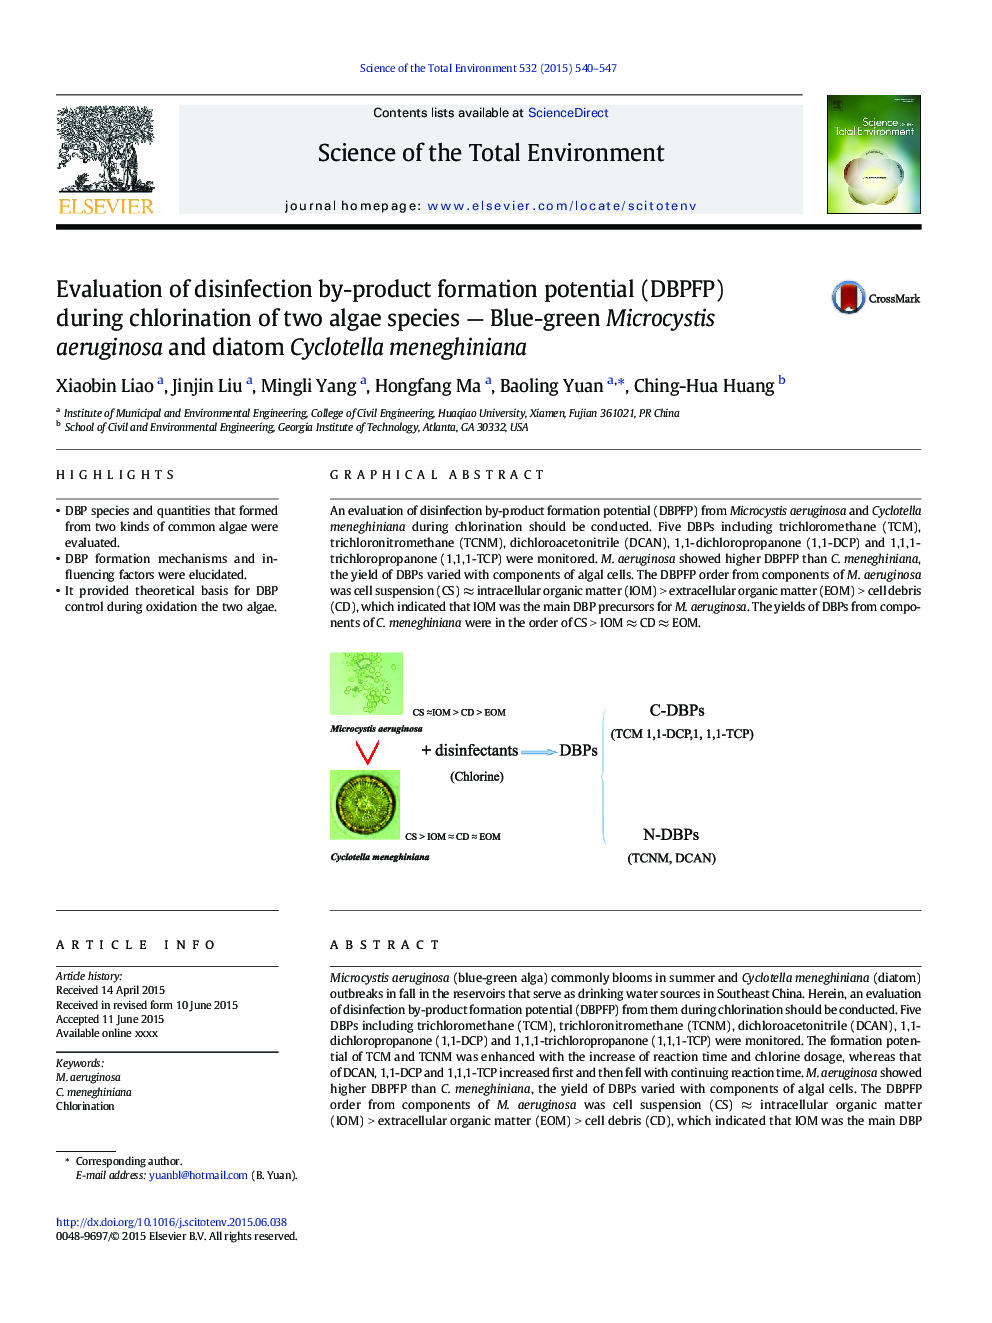 Evaluation of disinfection by-product formation potential (DBPFP) during chlorination of two algae species - Blue-green Microcystis aeruginosa and diatom Cyclotella meneghiniana